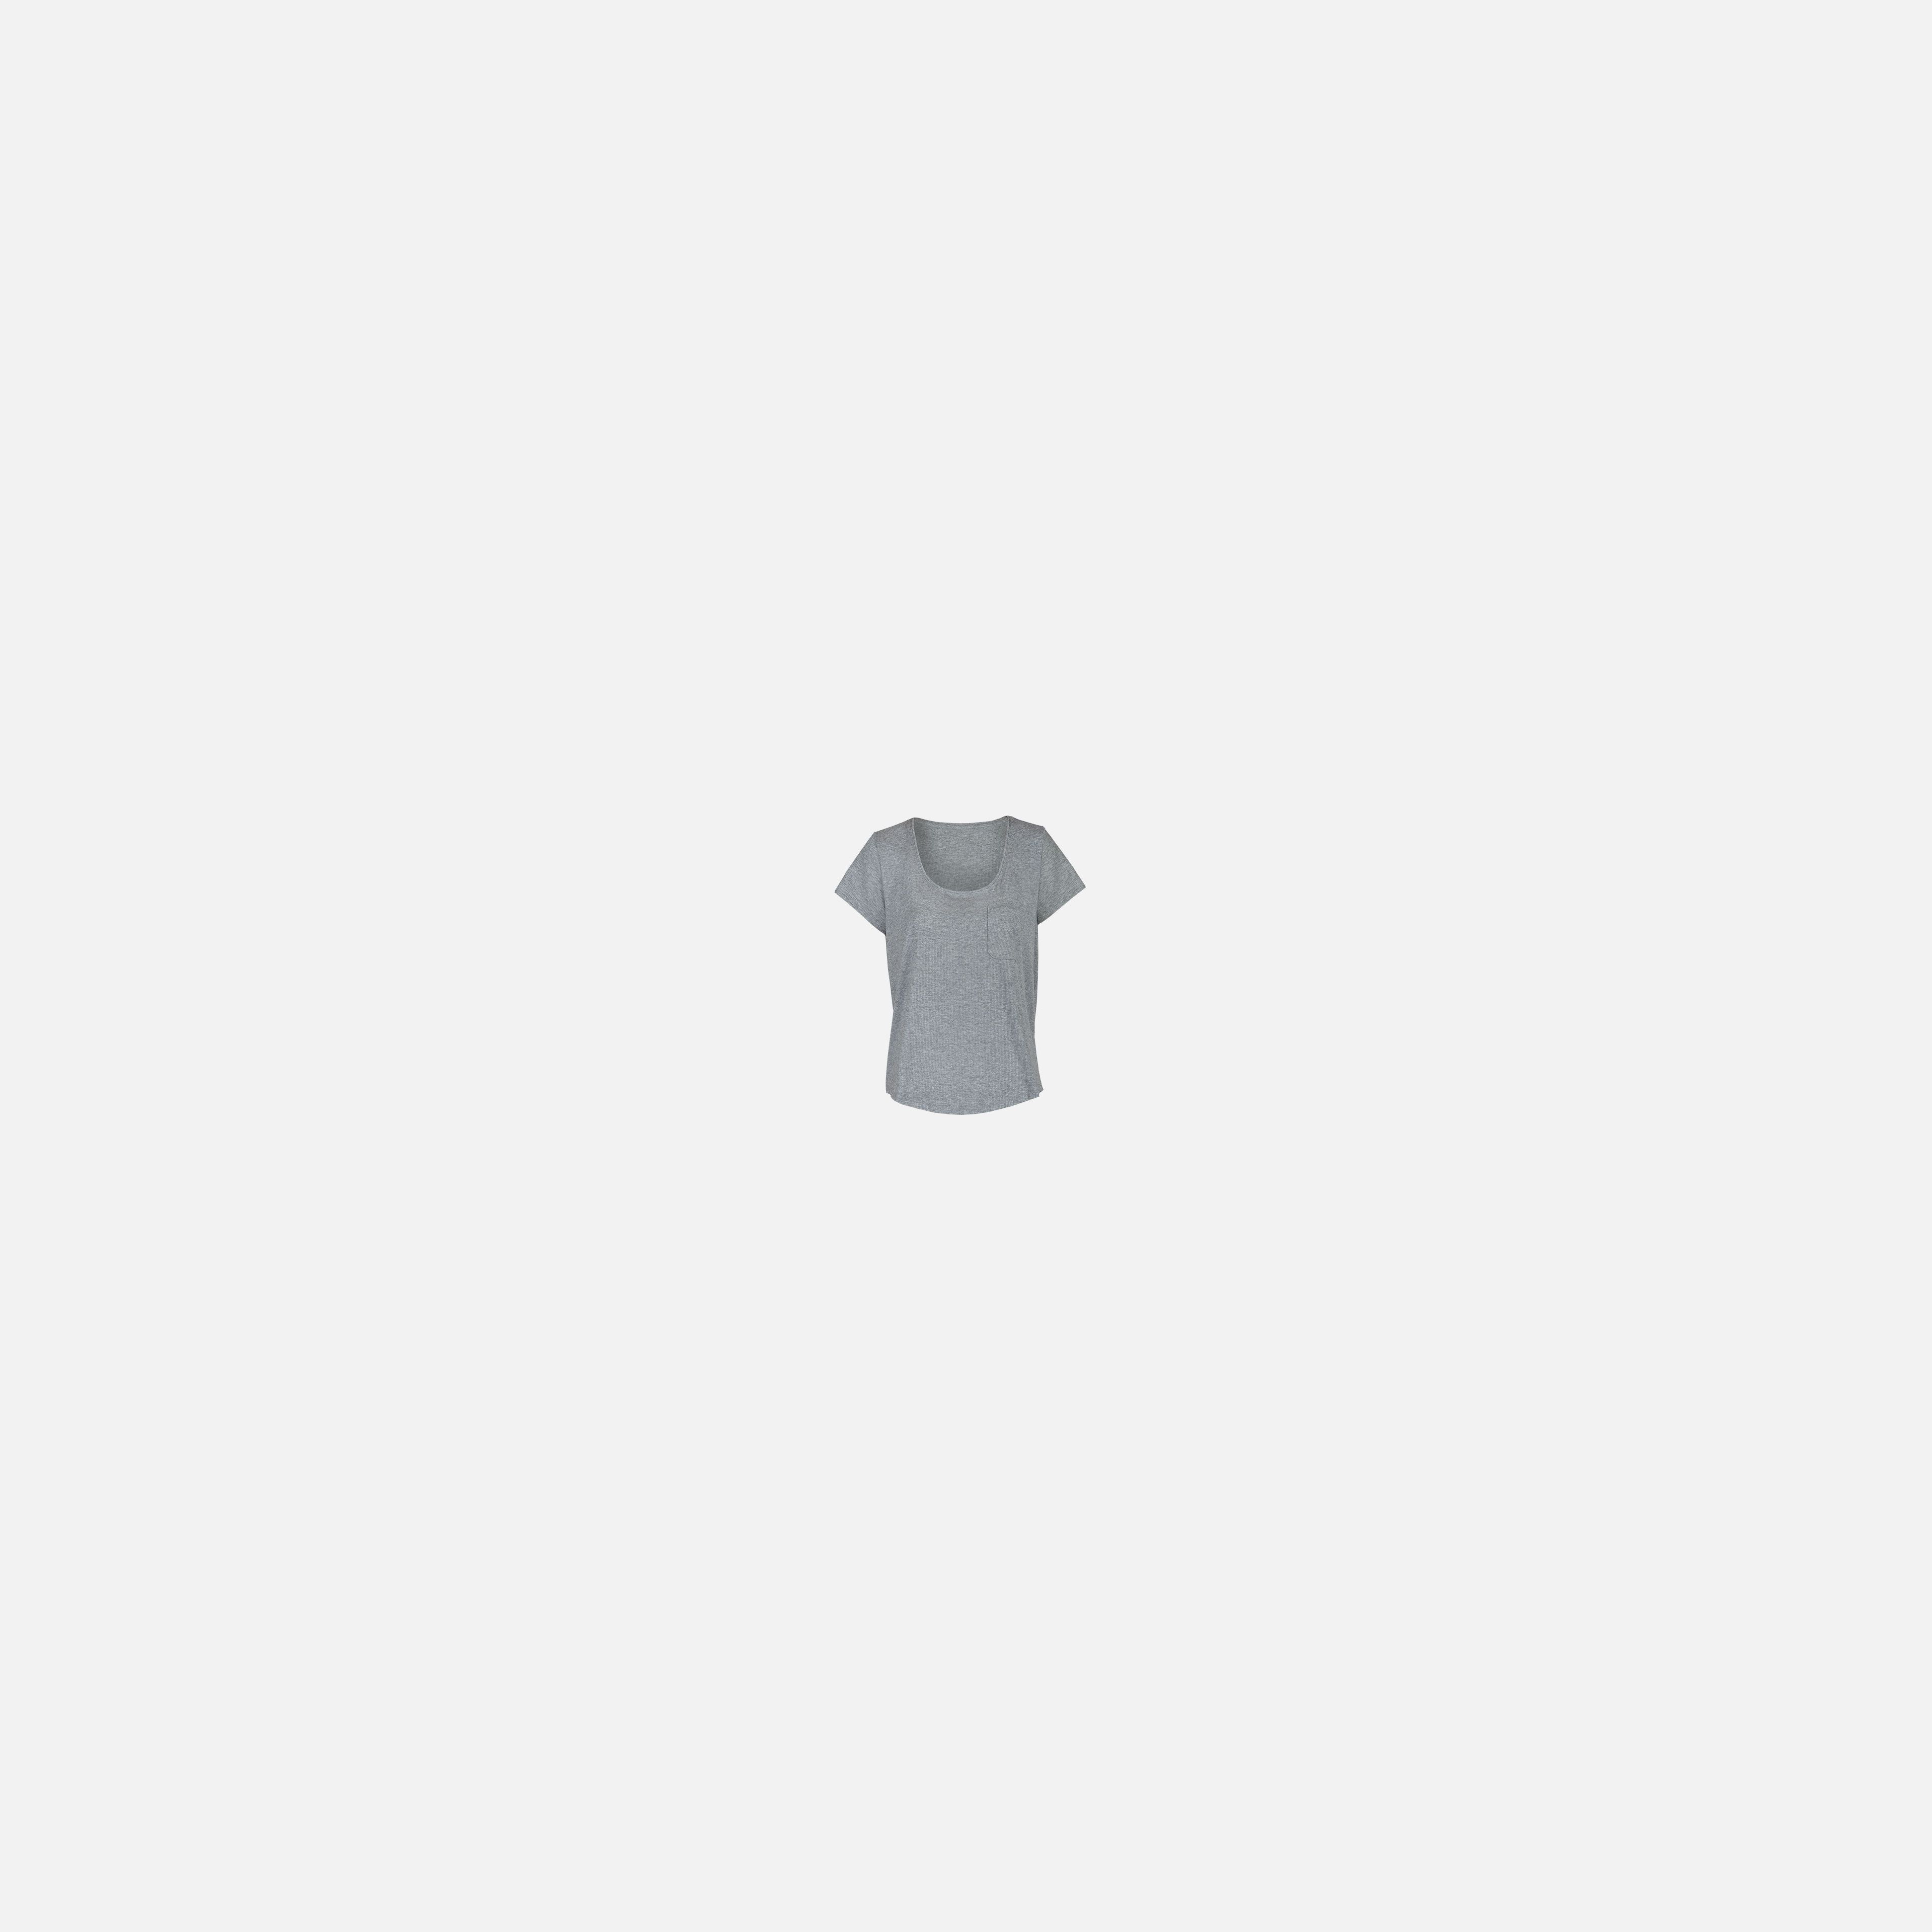 The All-Day Tee: Heather Gray